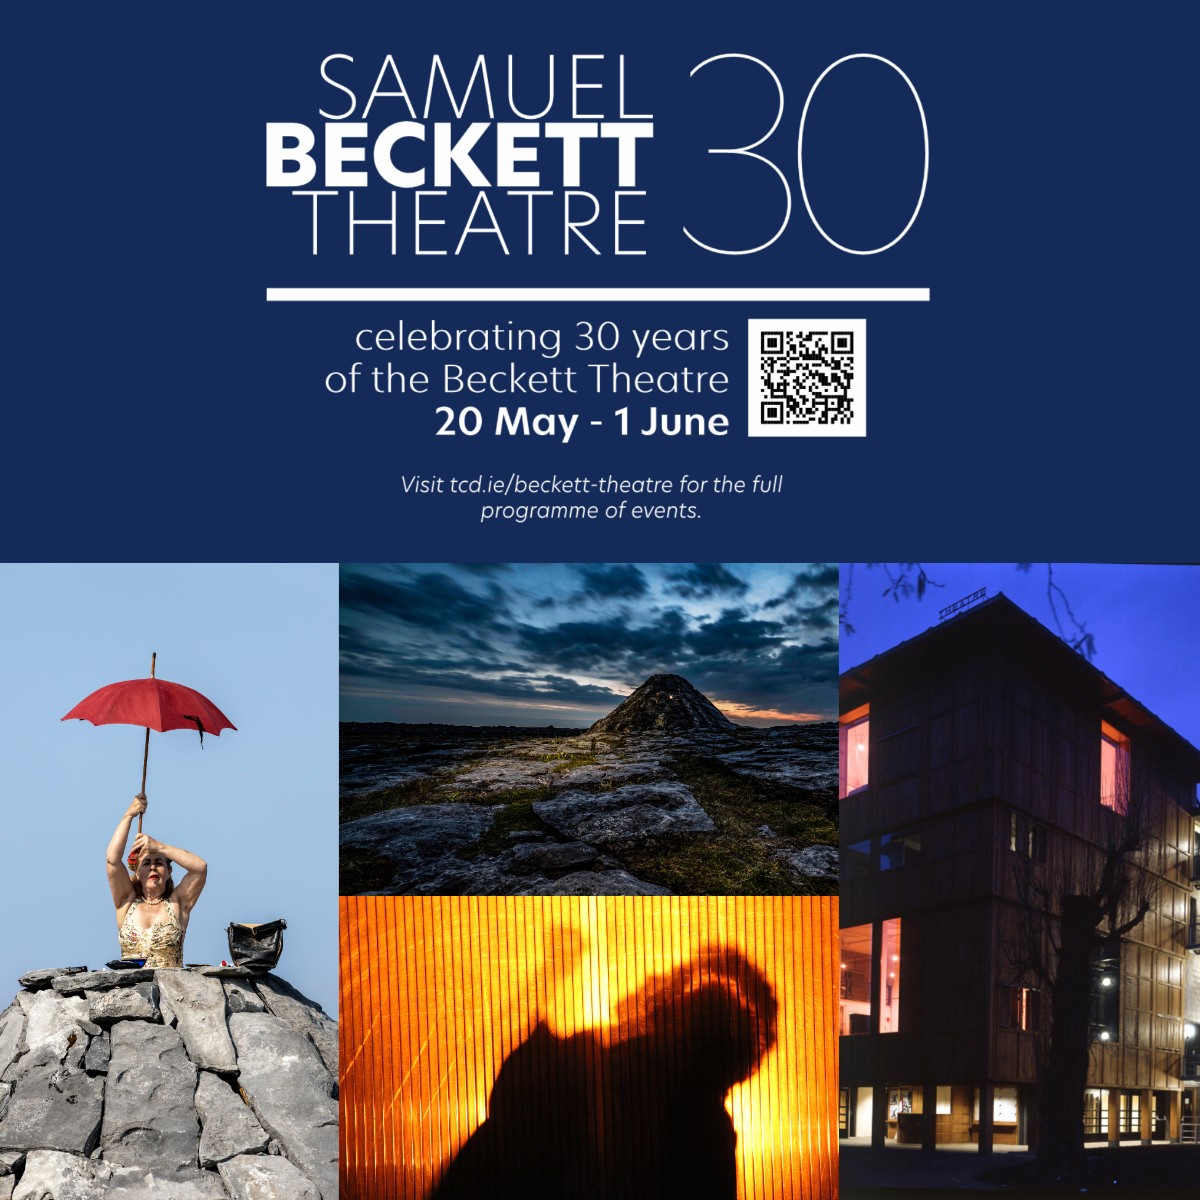 The Samuel Beckett Theatre celebrates 30 years with a fantastic programme from May 20th to June 1st. Check out the programme here: beckett-theatre.ticketsolve.com/ticketbooth/sh… 🎭 #Theatre #celebration #TrinityCollegeDublin